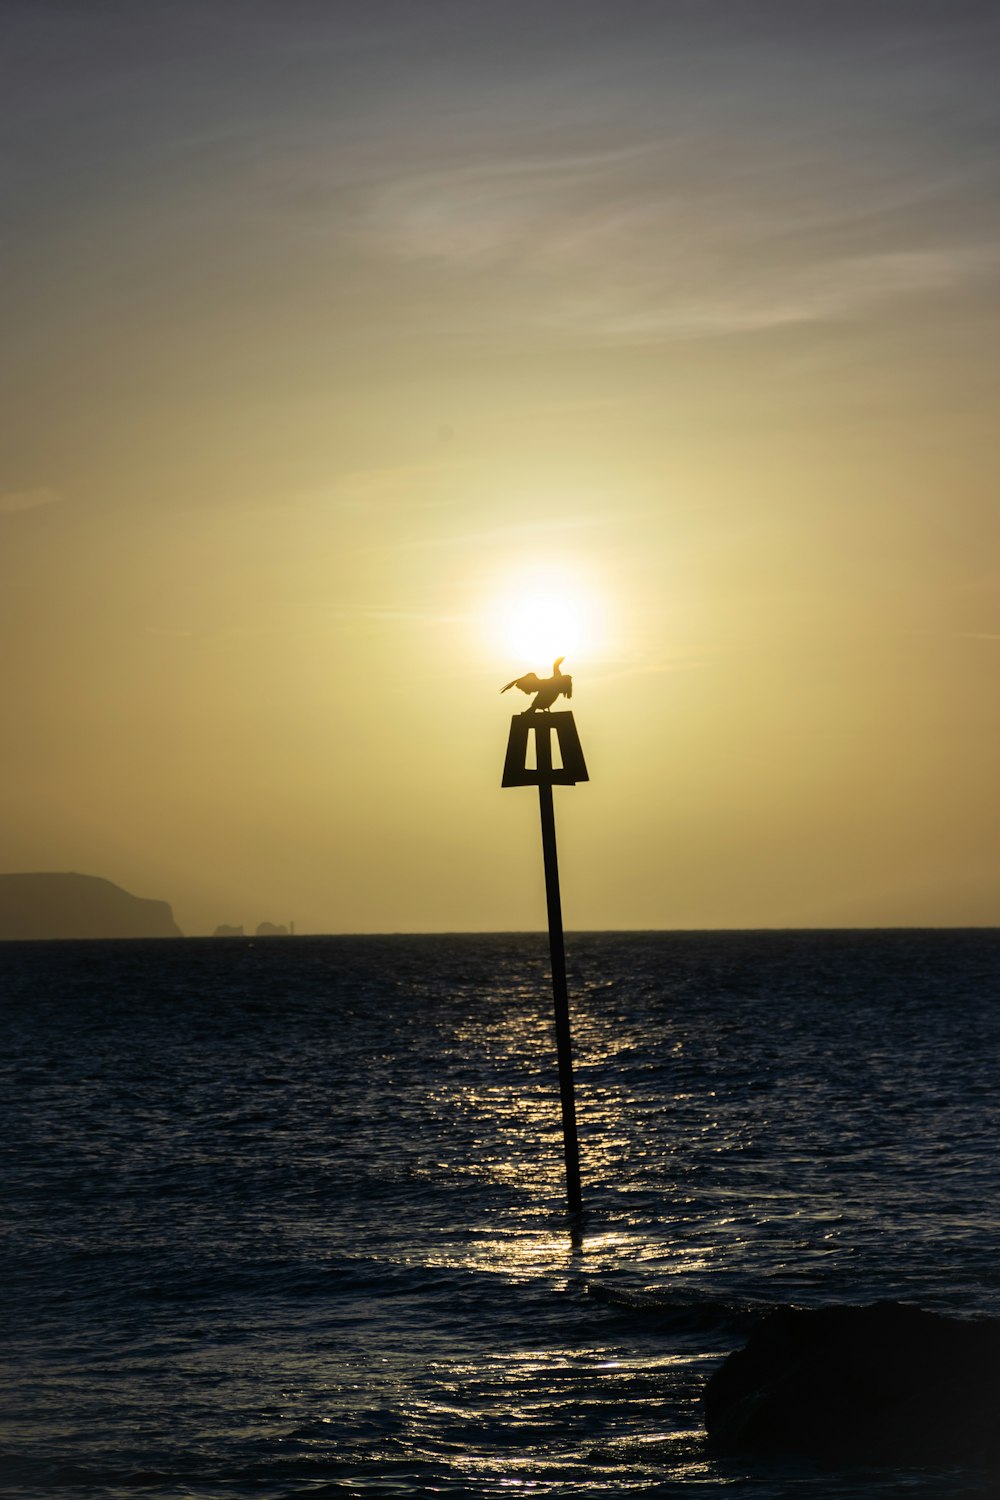 the sun is setting over the ocean with a pole sticking out of the water